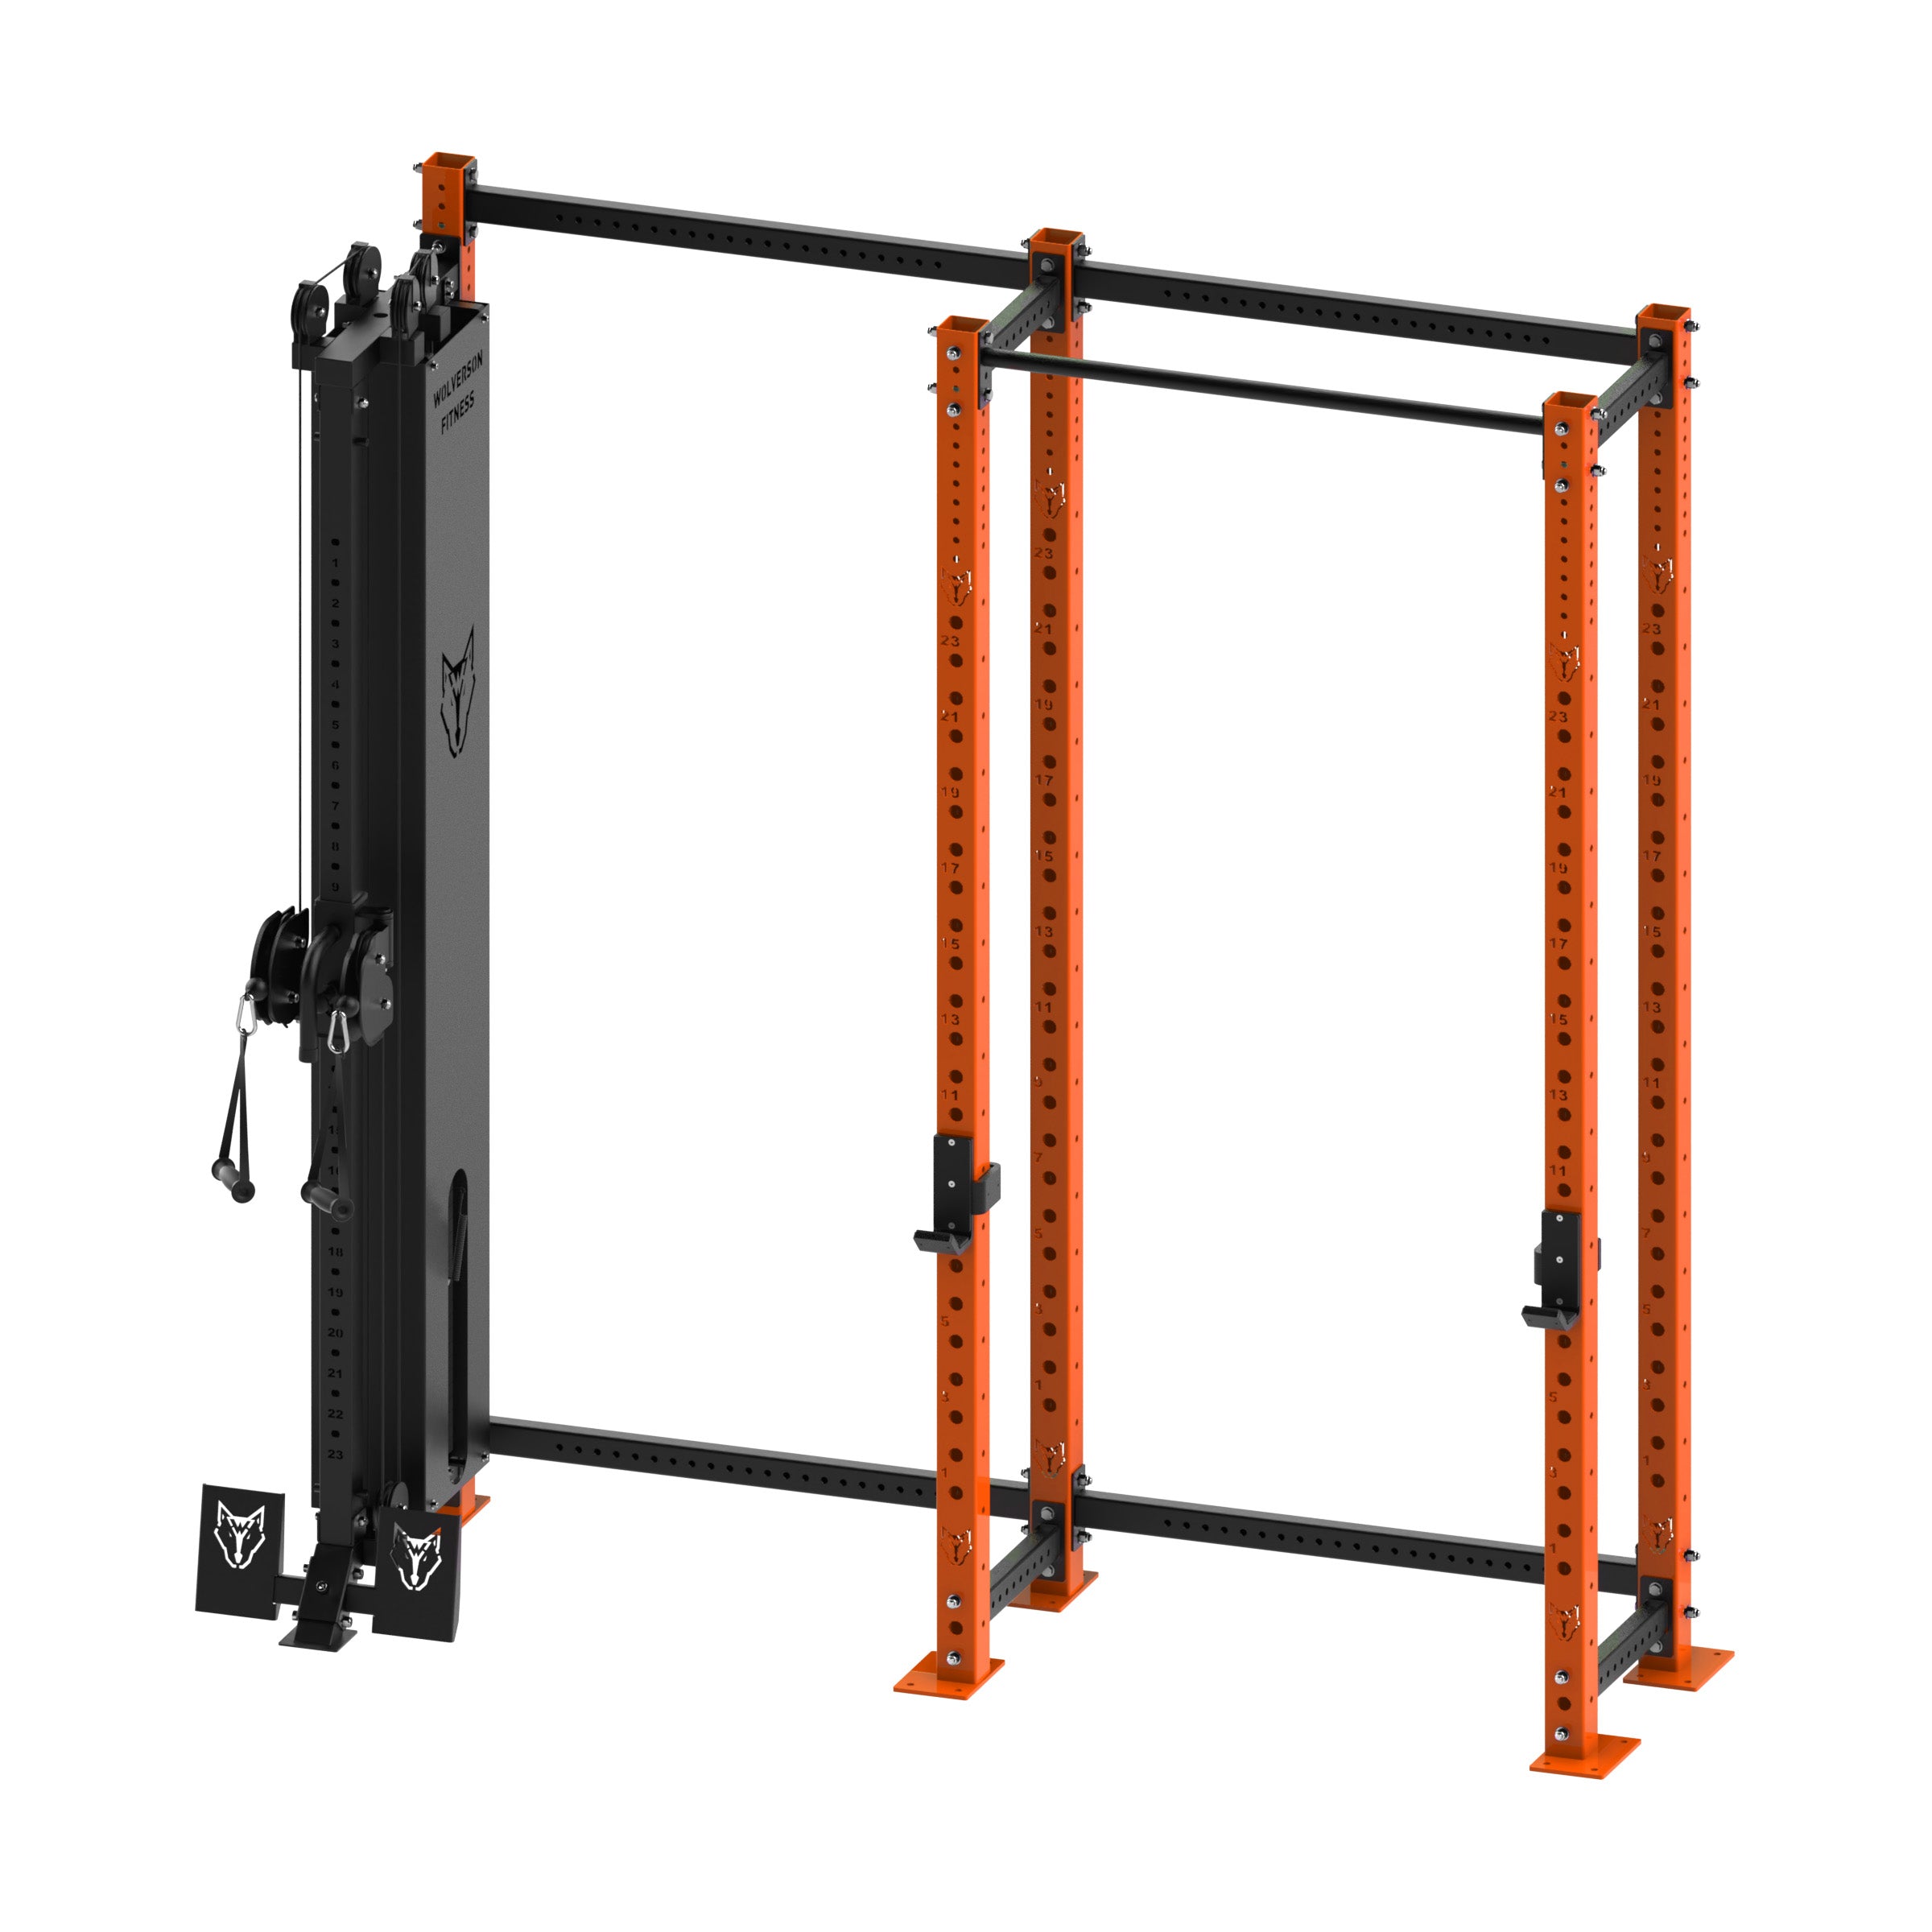 Wolverson Foundation Series -  Compact Rack